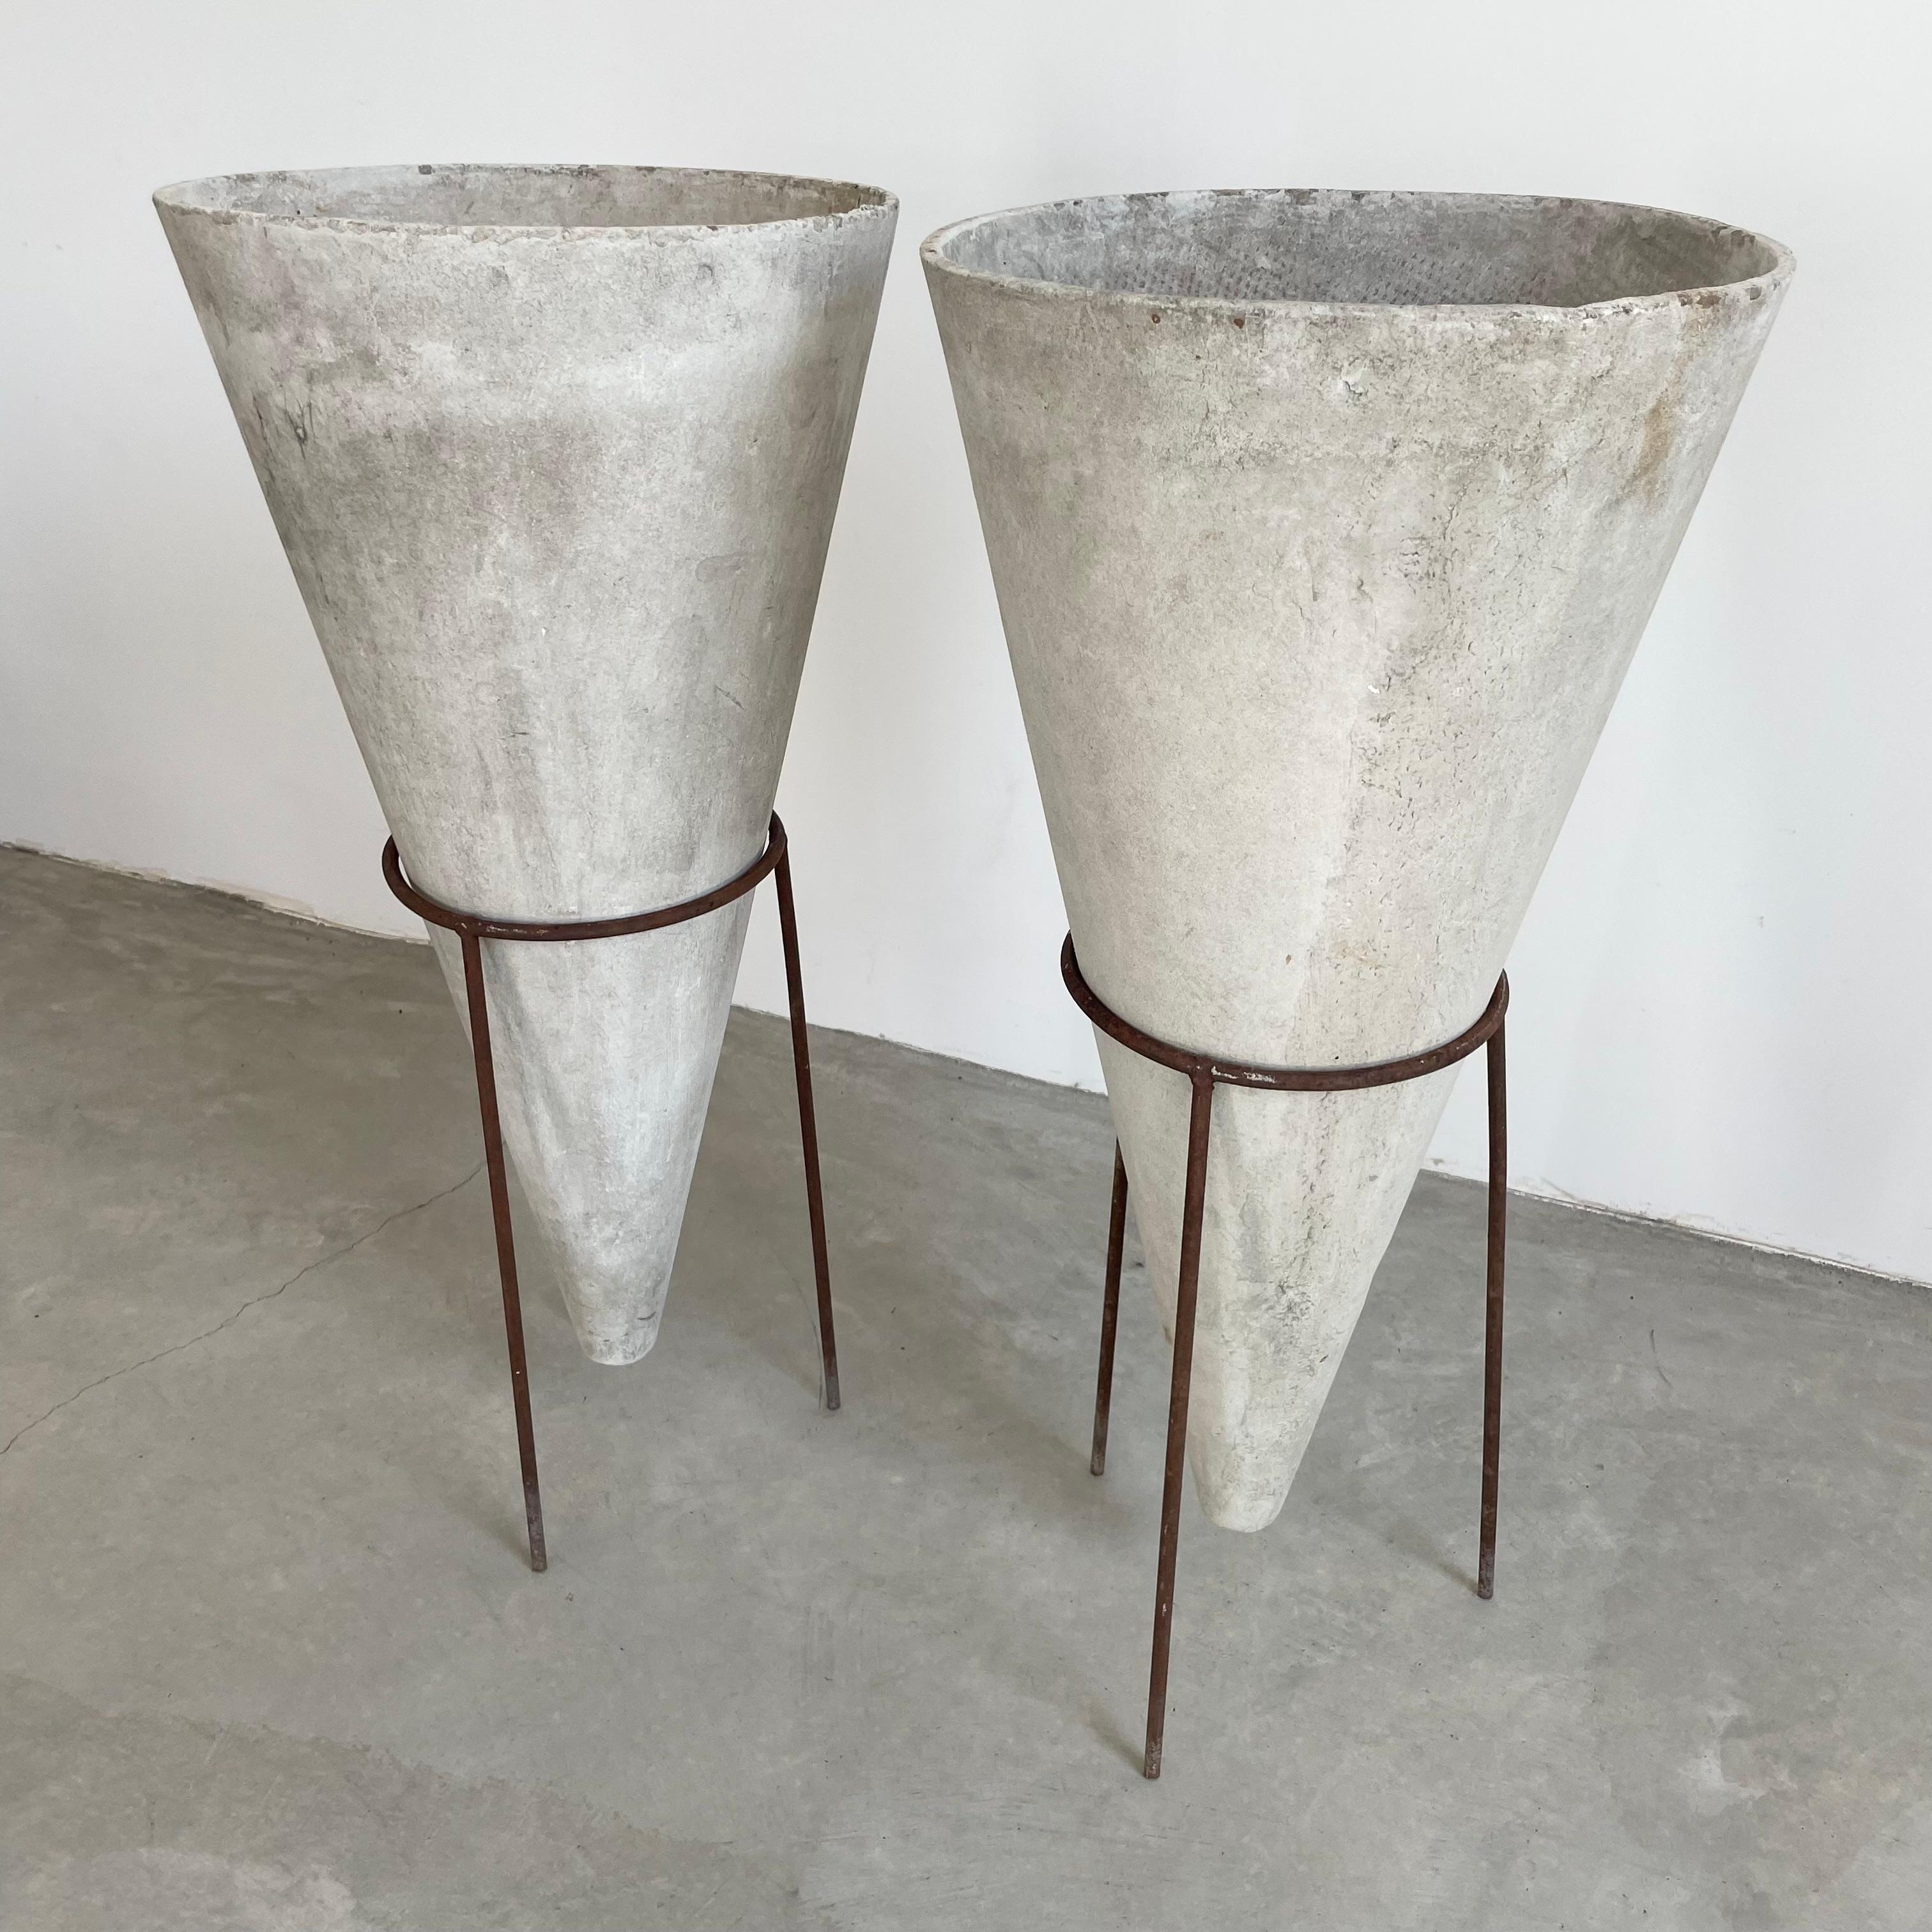 Unusual concrete cone planters by Will Guhl. Handmade in the 1960s, in Switzerland. 3 Feet tall. Cones dated on inside; 1968 and 1965 pictured above. Inverted concrete cone sits comfortably in a tall slender iron tripod stand. Bottom of cone floats